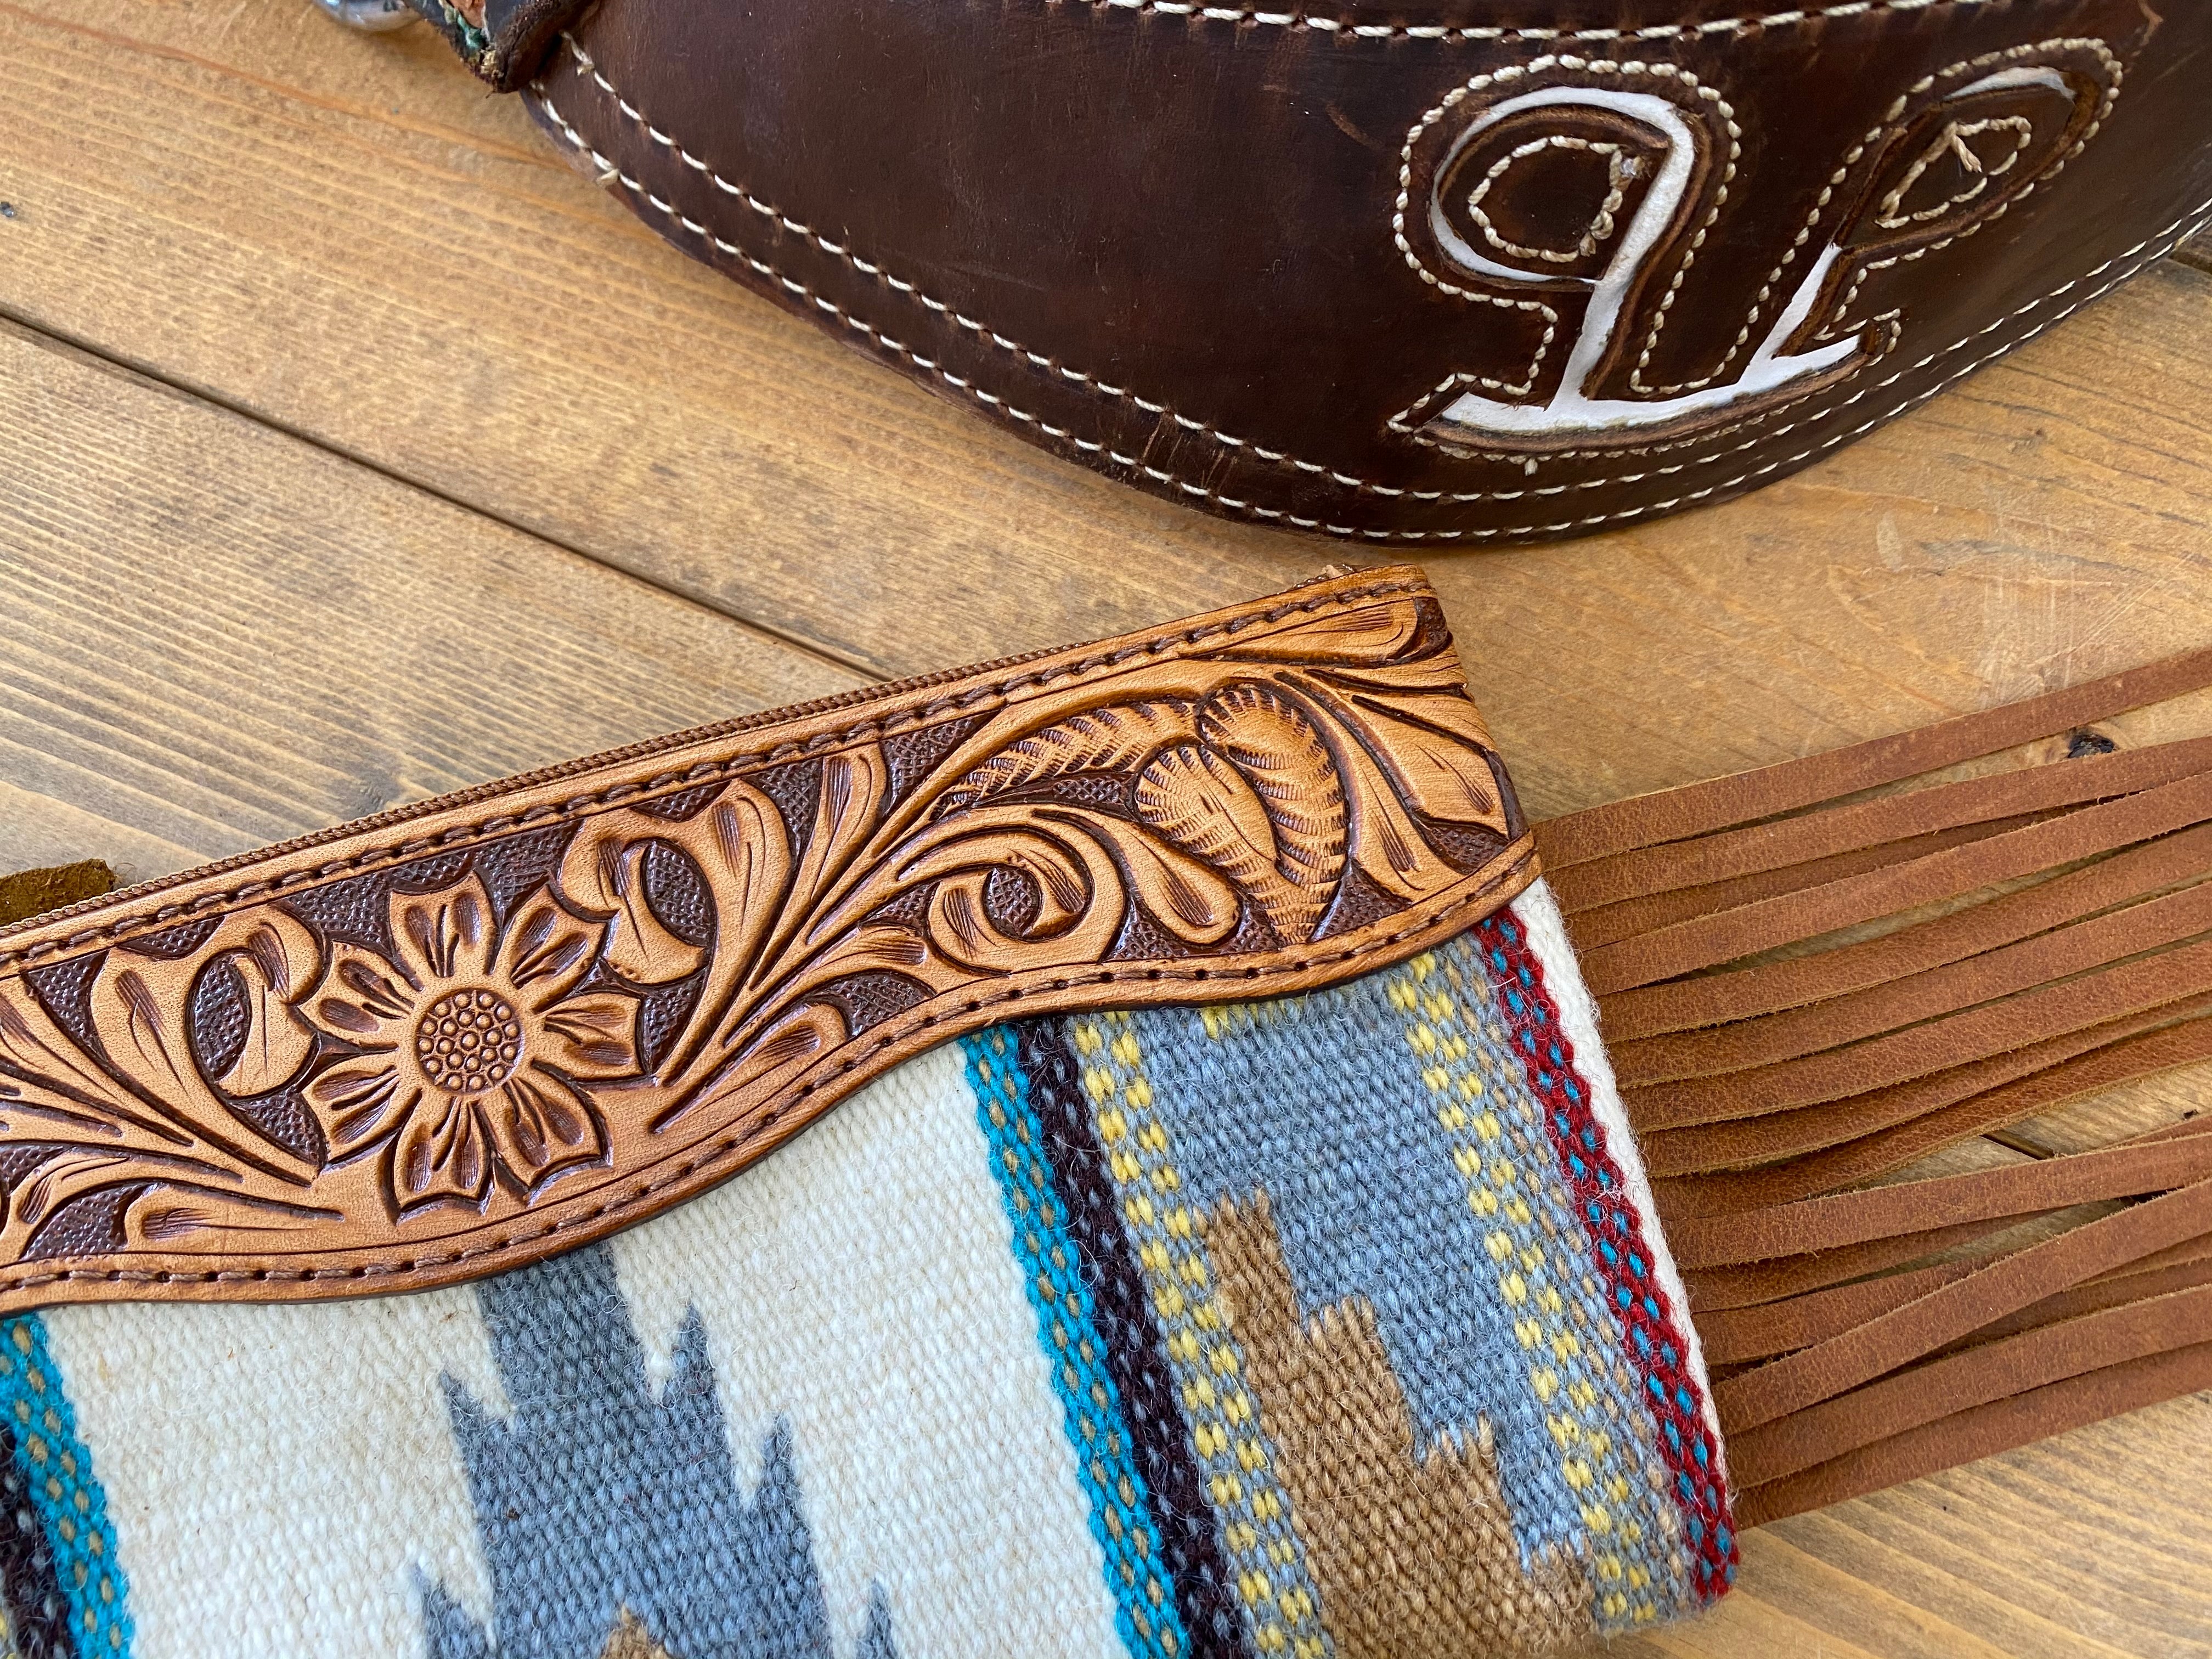 Canyon Creek Saddle Blanket Clutch - Pistols and Petticoats